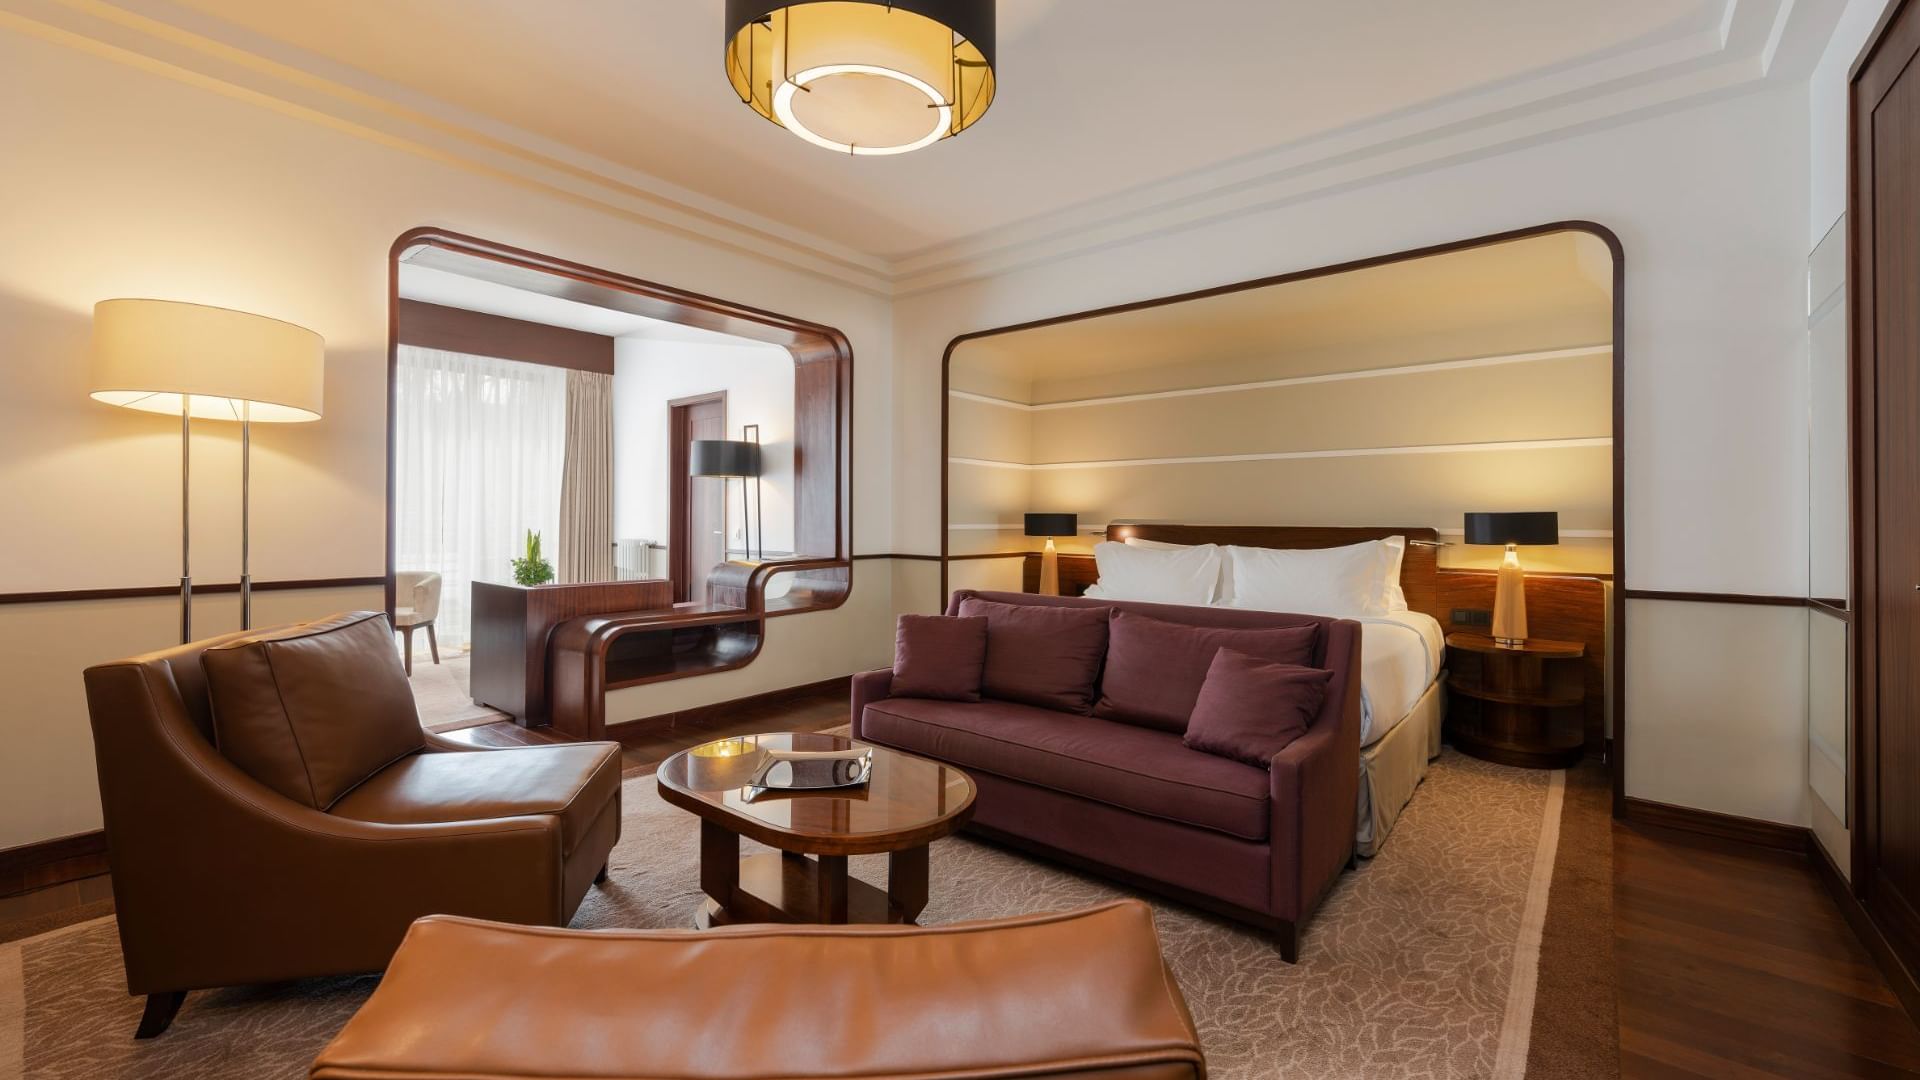 Comfy sofas, coffee table & lamps in living area of a Suite at Terra Nostra Garden Hotel